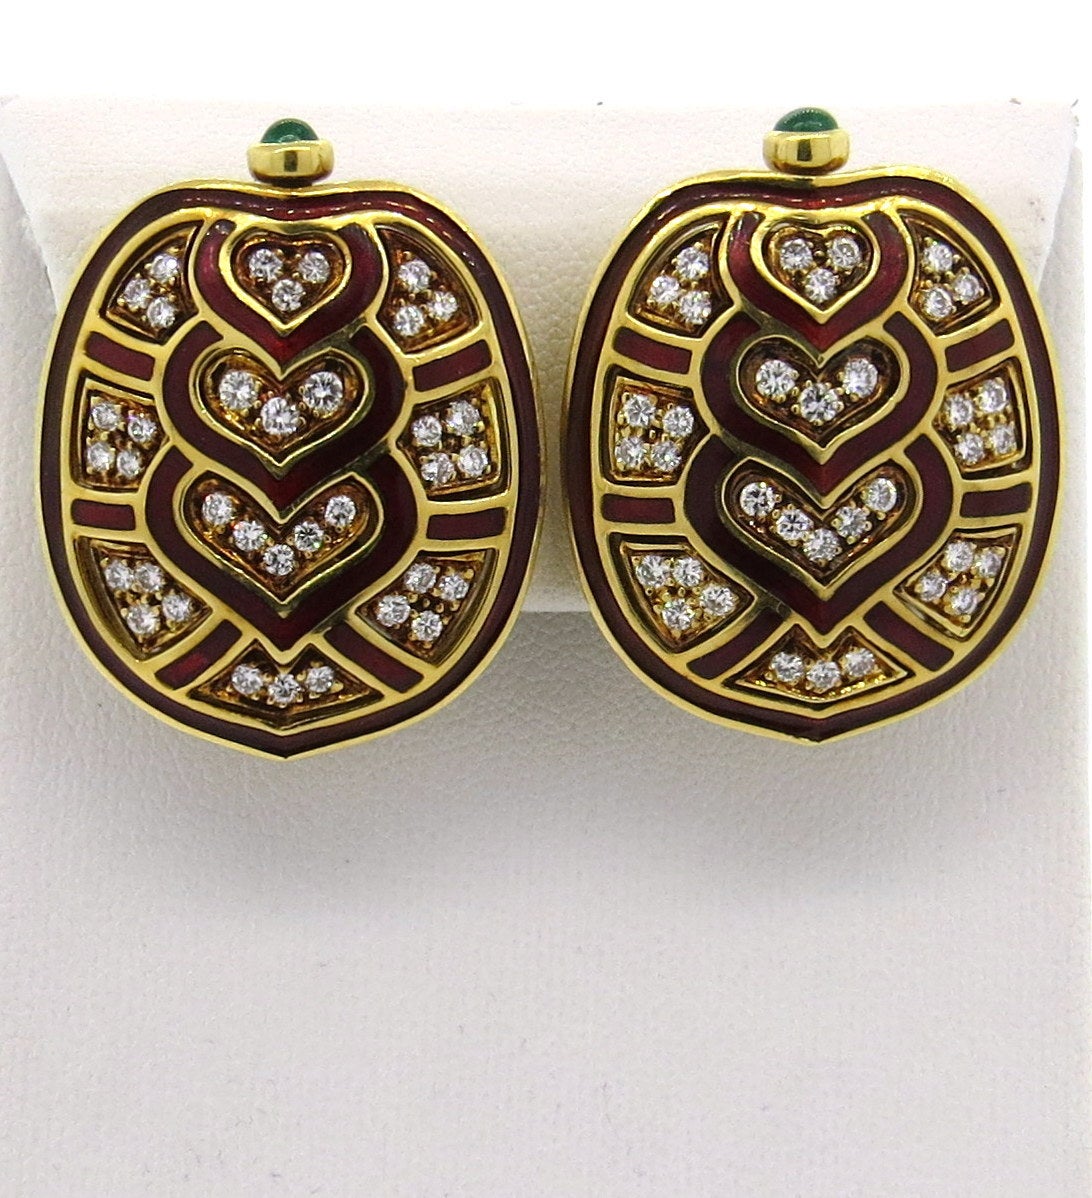 Impressive 18k gold earrings, designed by Judith Leiber, featuring turtle shell design, decorated with red enamel, emerald cabochons and approx. 2.00ctw in diamonds. Measure 33mm x 25mm. Marked Judith Leiber and 750. Weight - 38.1 grams